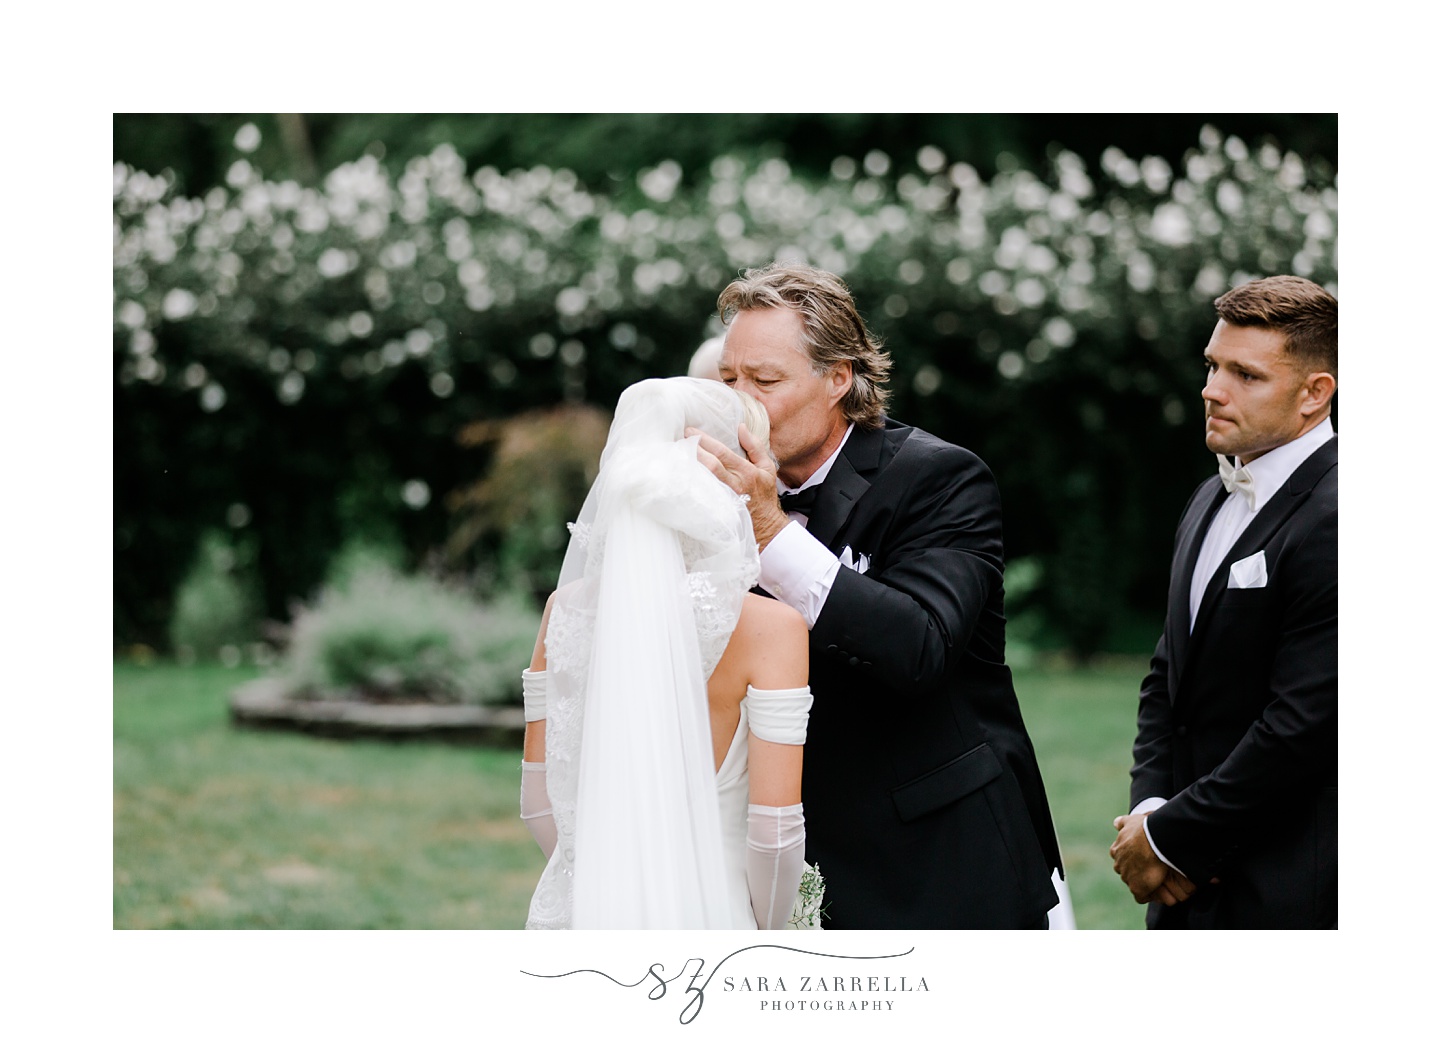 father kisses bride's forehead before wedding ceremony on lawn at Glen Manor House